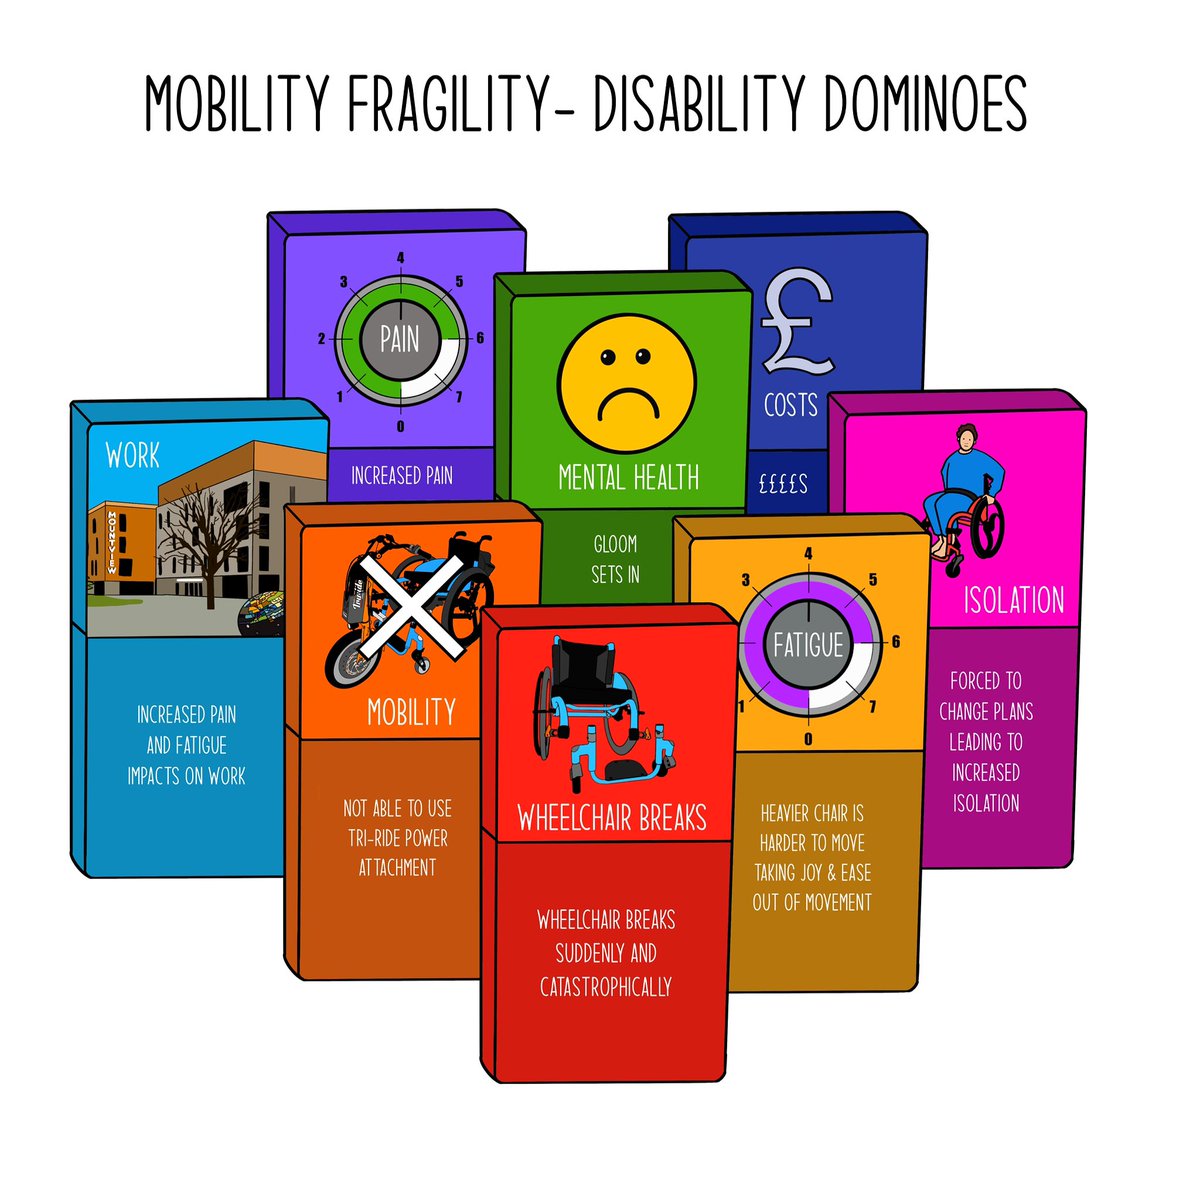 My Wheelchair broke on Wednesday & it was the first domino to fall with many impacts following including increased, pain & fatigue, changed plans, impacts on my work & mood. I created this drawing to try & explain the knock on impacts of a broken mobility aid. #MobilityFragility